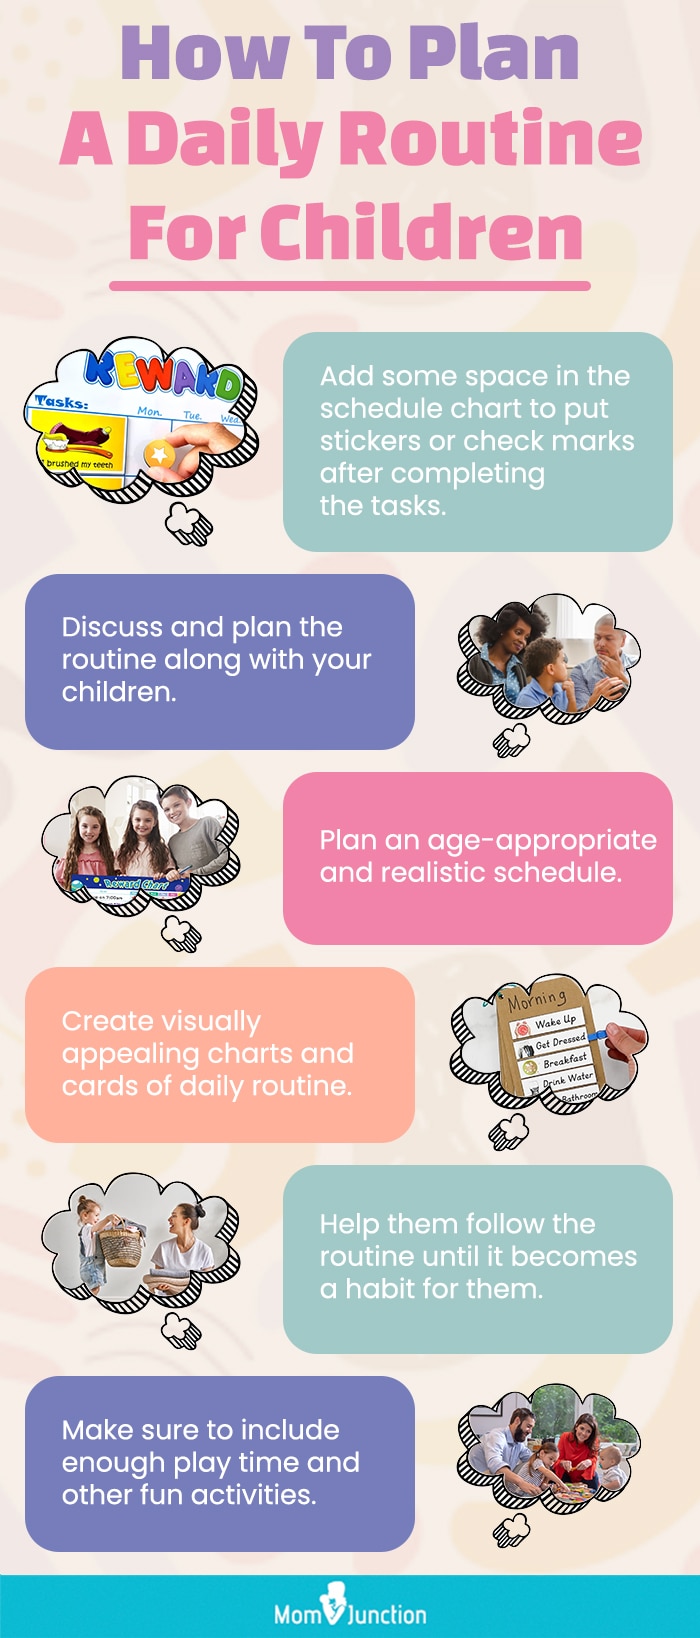 Tips to Support Healthy Routines for Children and Teens